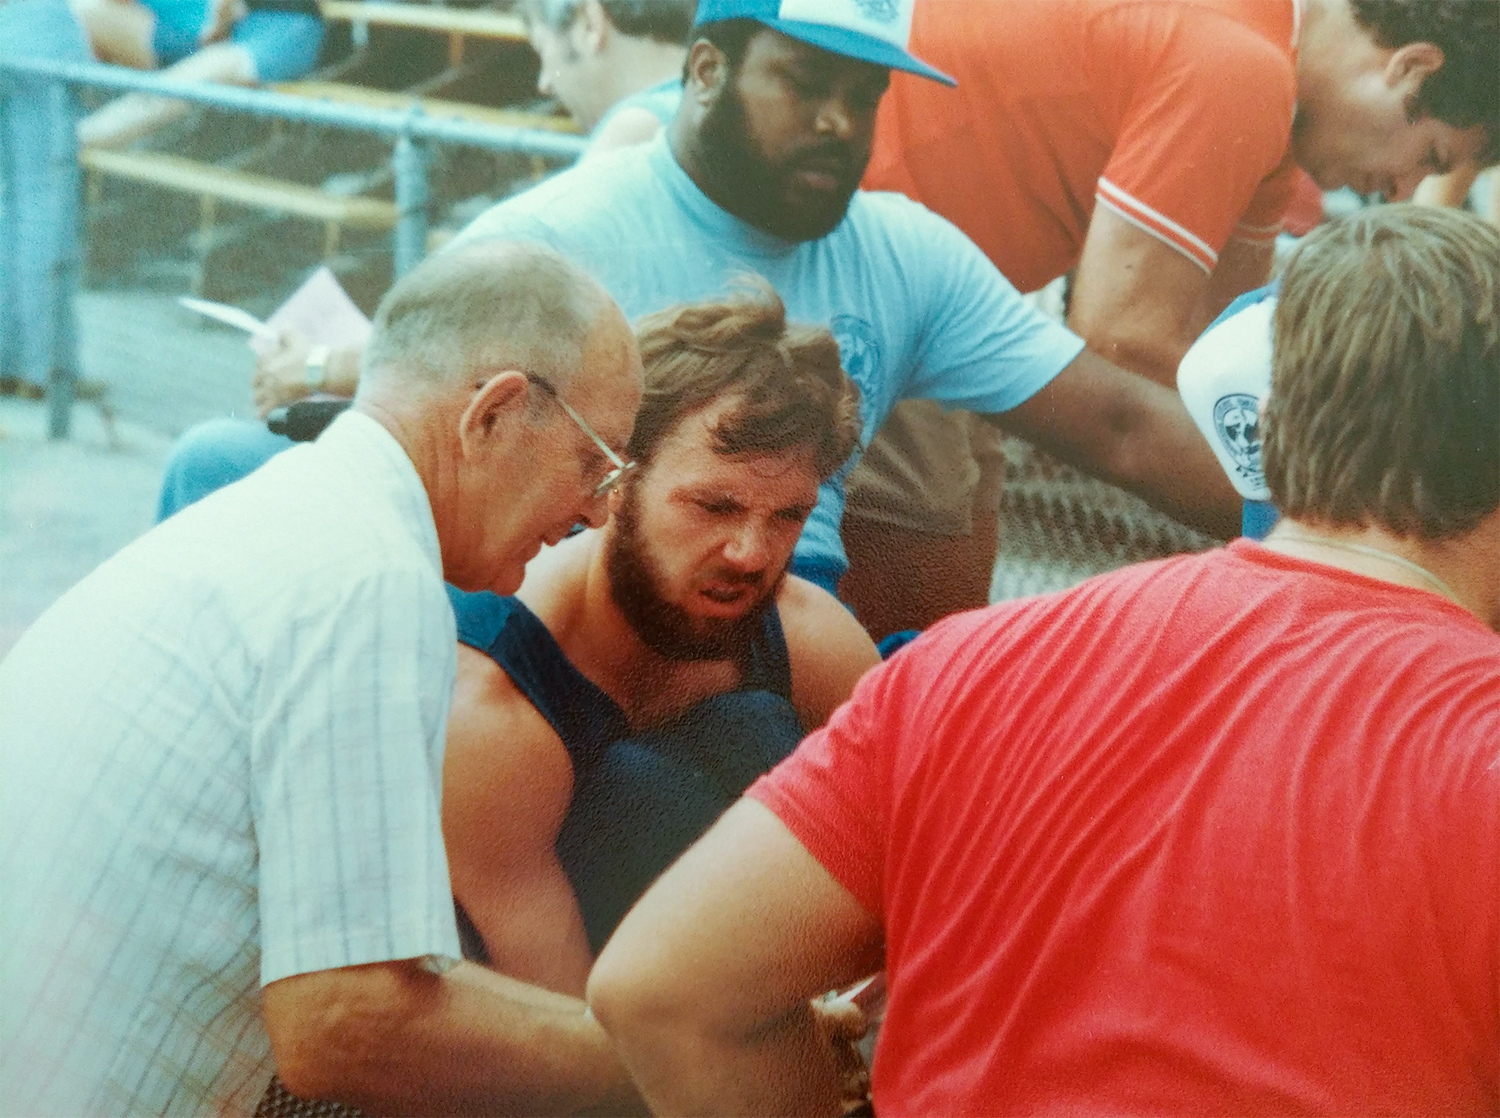 Rory Cooper in the 1980s w grandfather Rory Munn and Tim David peer mentor in red shirt doing work on Rory’s racing wheelchair